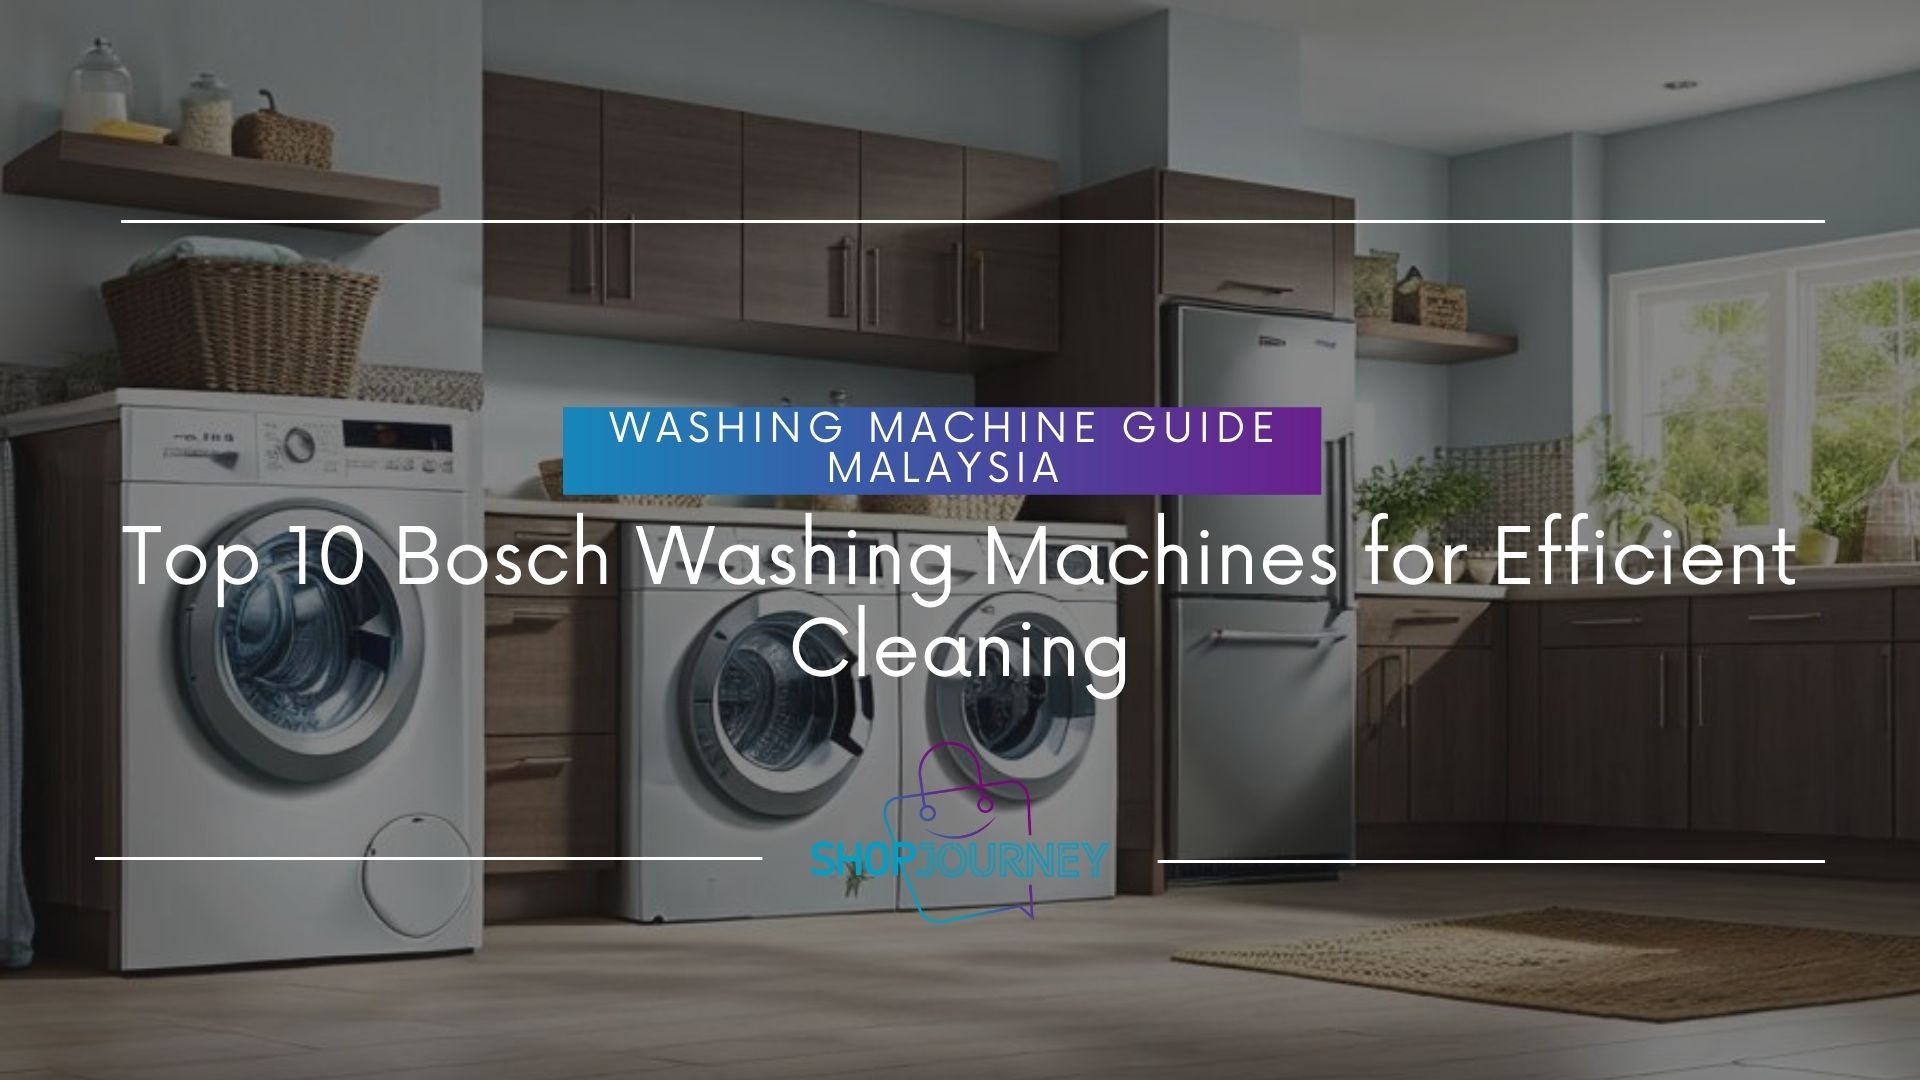 Top 10 Bosch washing machines for efficient cleaning - ShopJourney